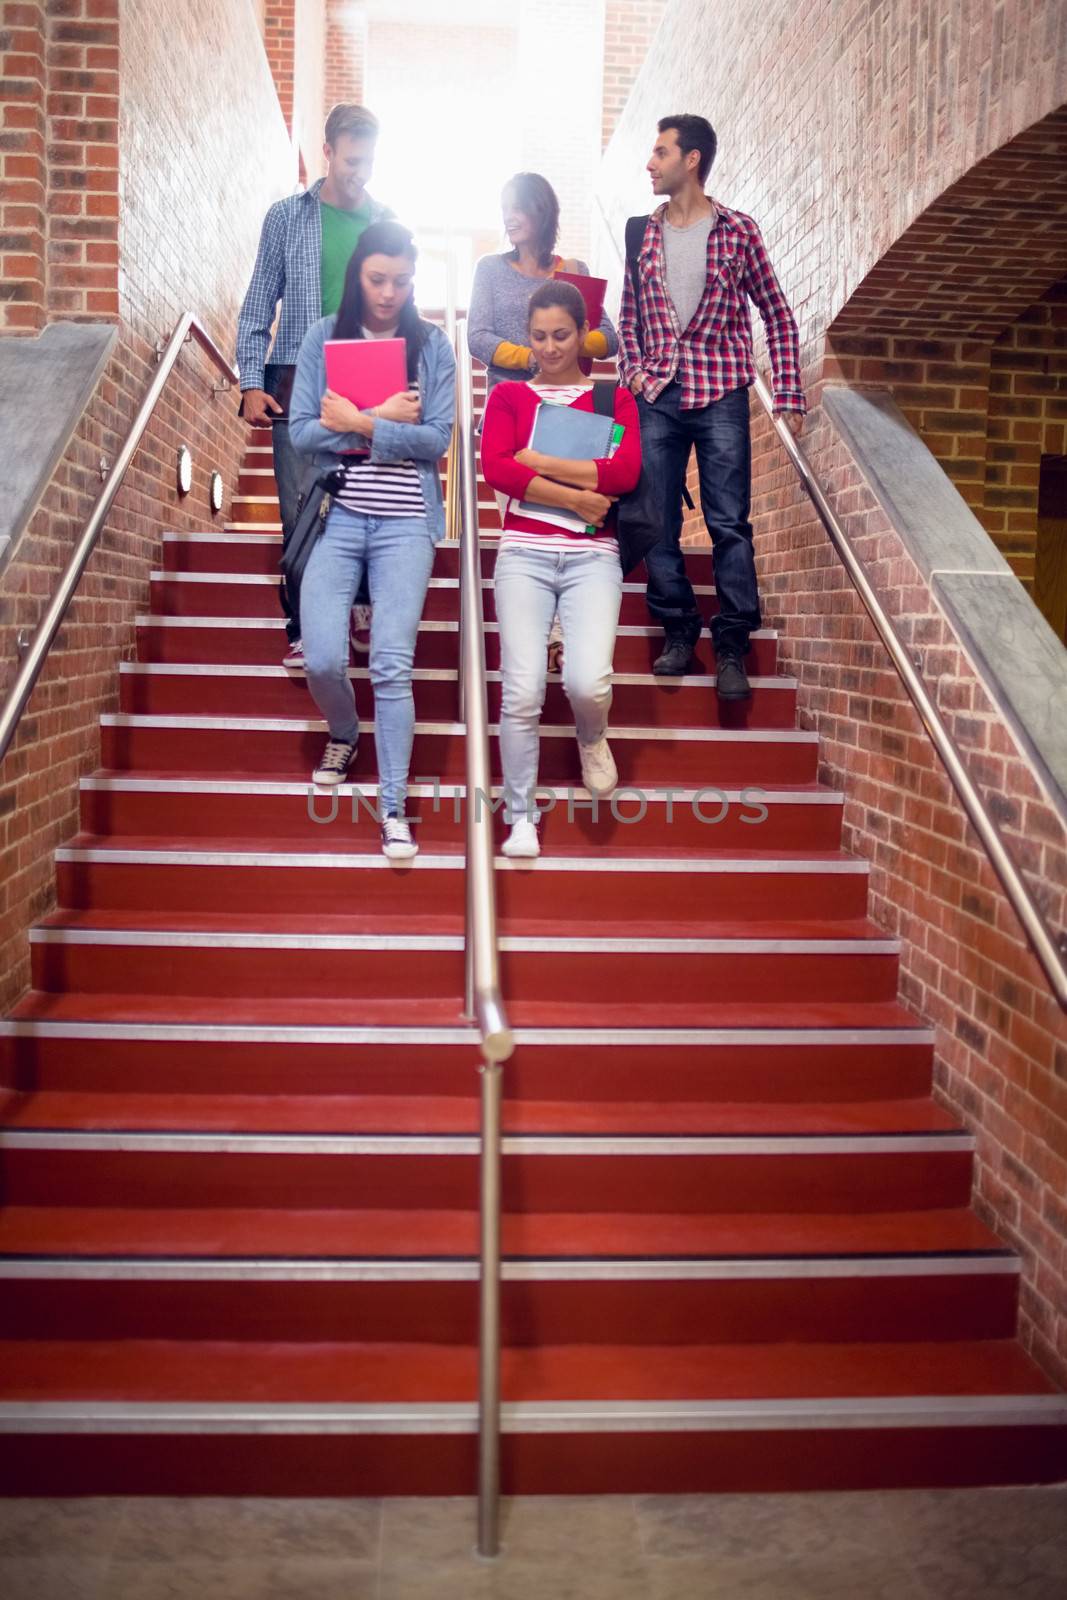 College students walking down stairs in college by Wavebreakmedia